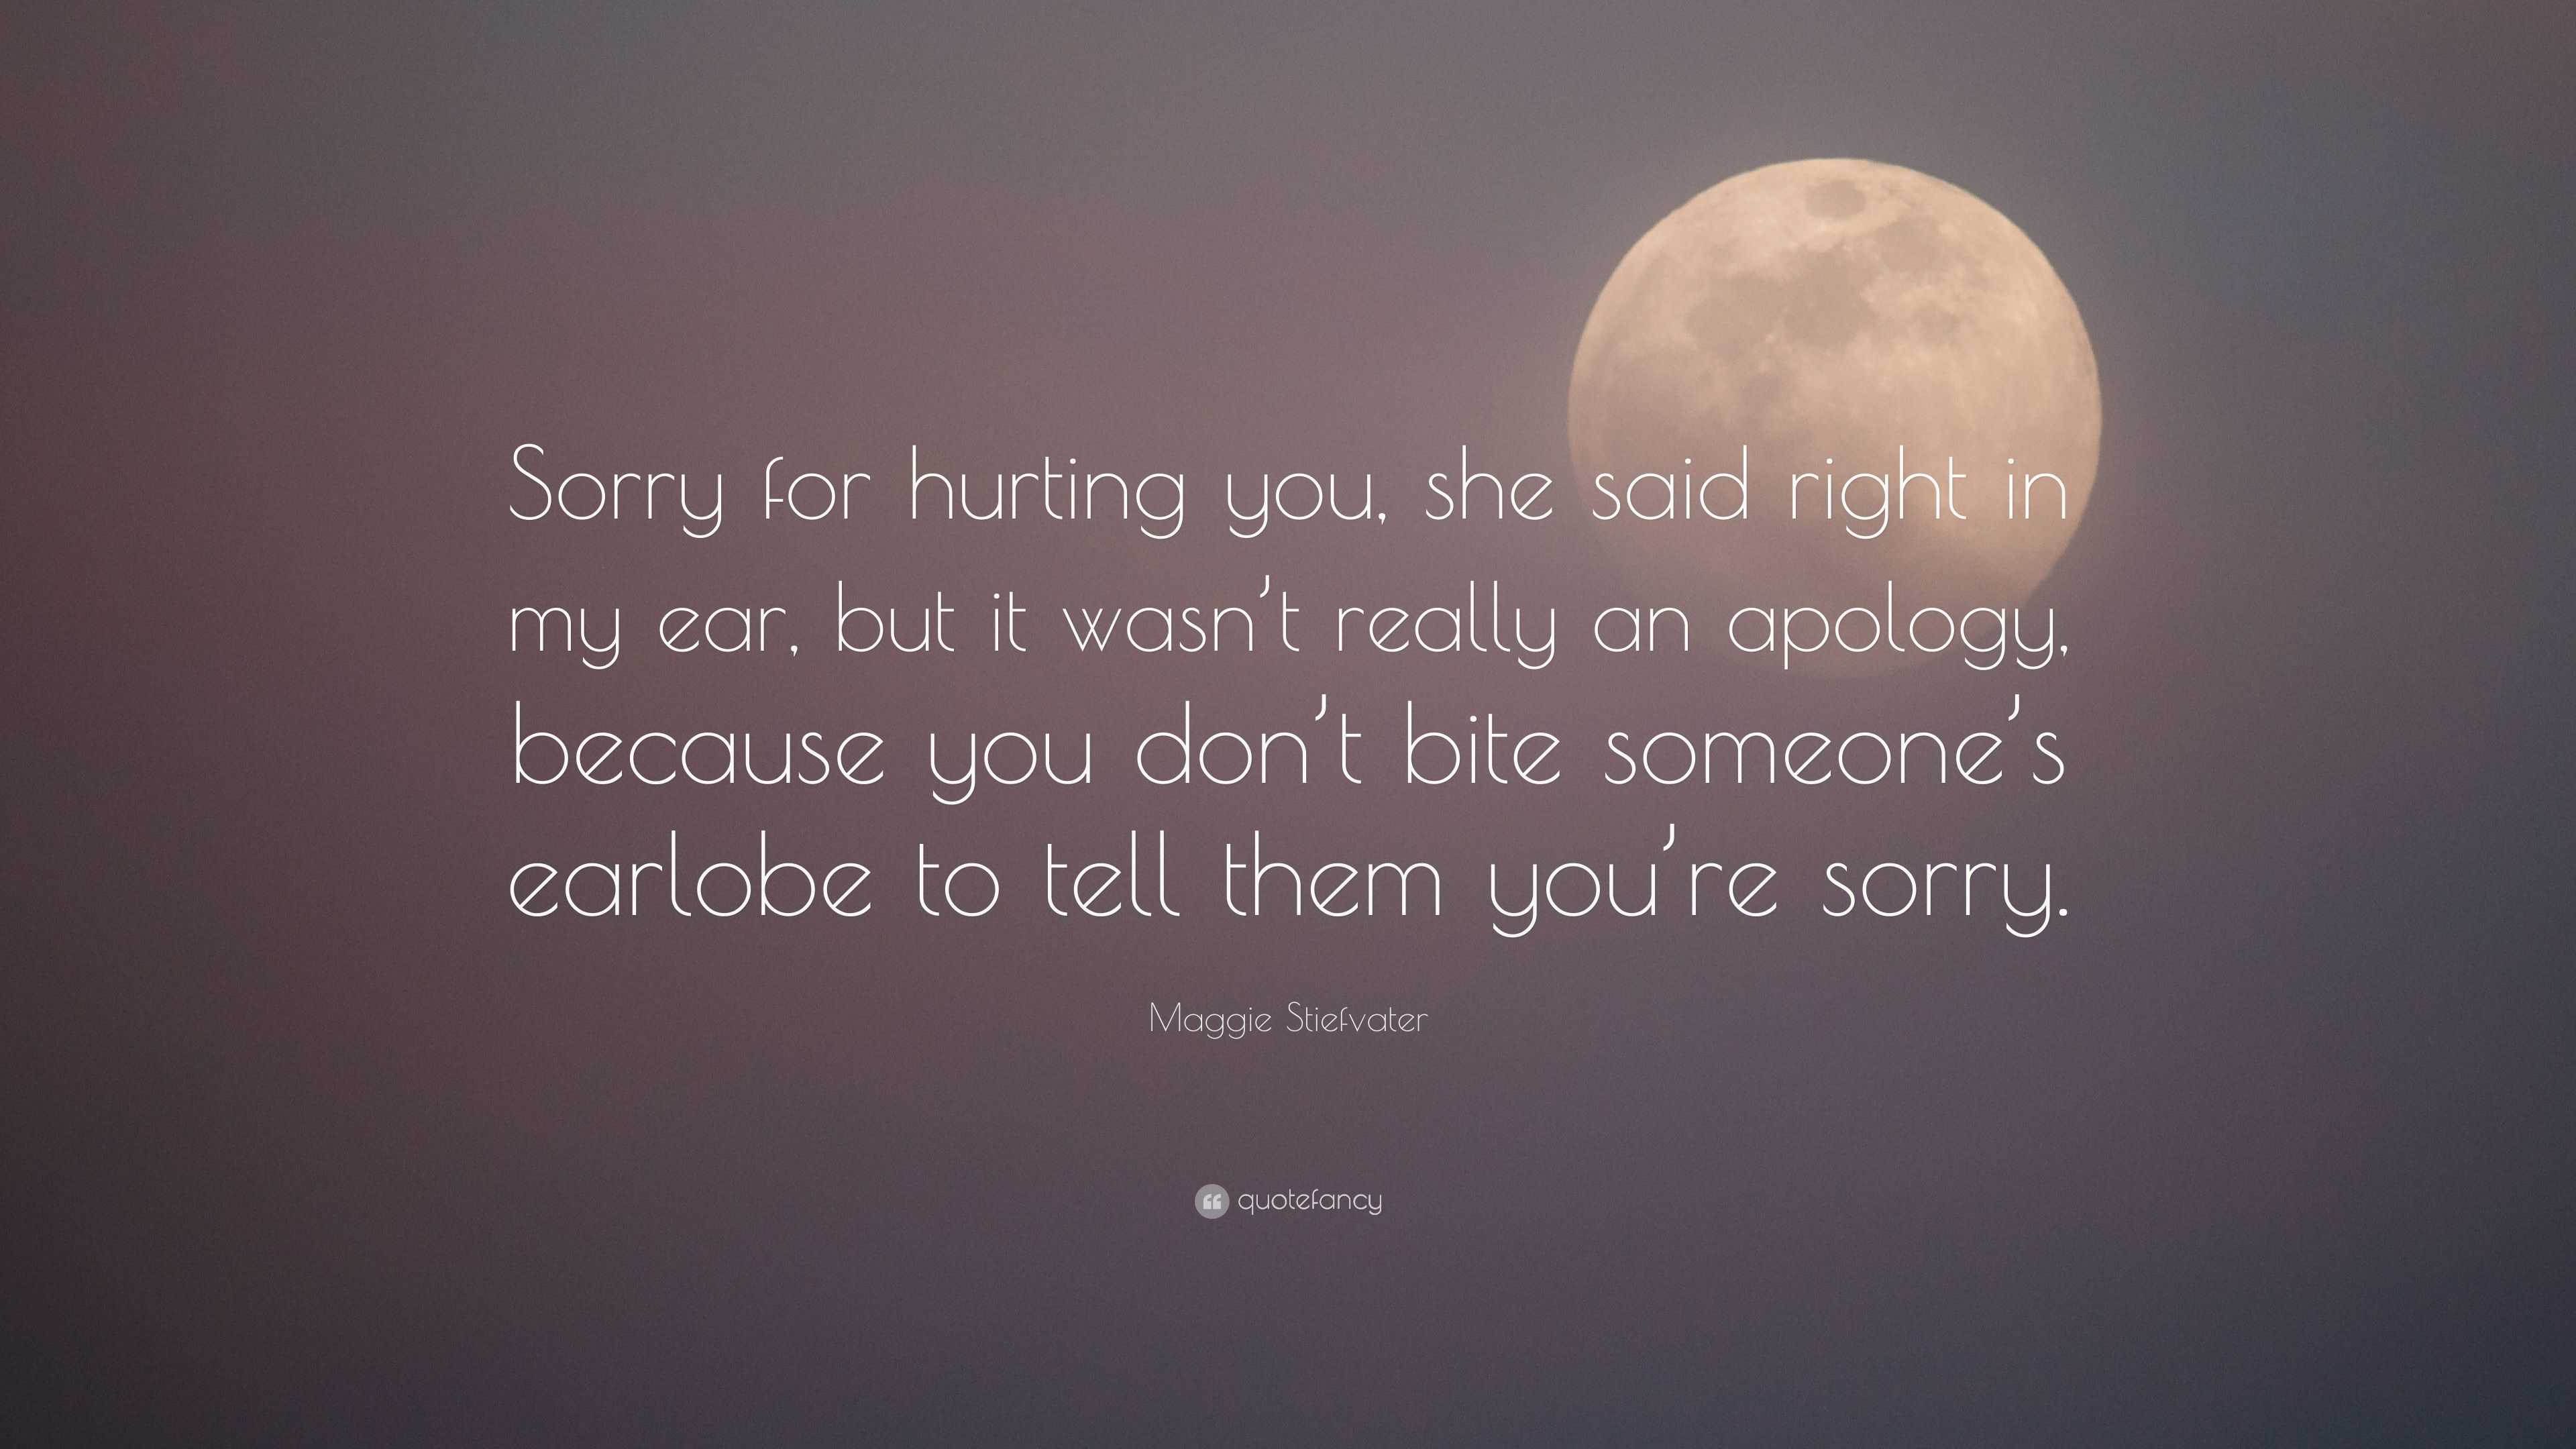 Maggie Stiefvater Quote Sorry For Hurting You She Said Right In My Ear But It Wasn T Really An Apology Because You Don T Bite Someone S Earlo 7 Wallpapers Quotefancy